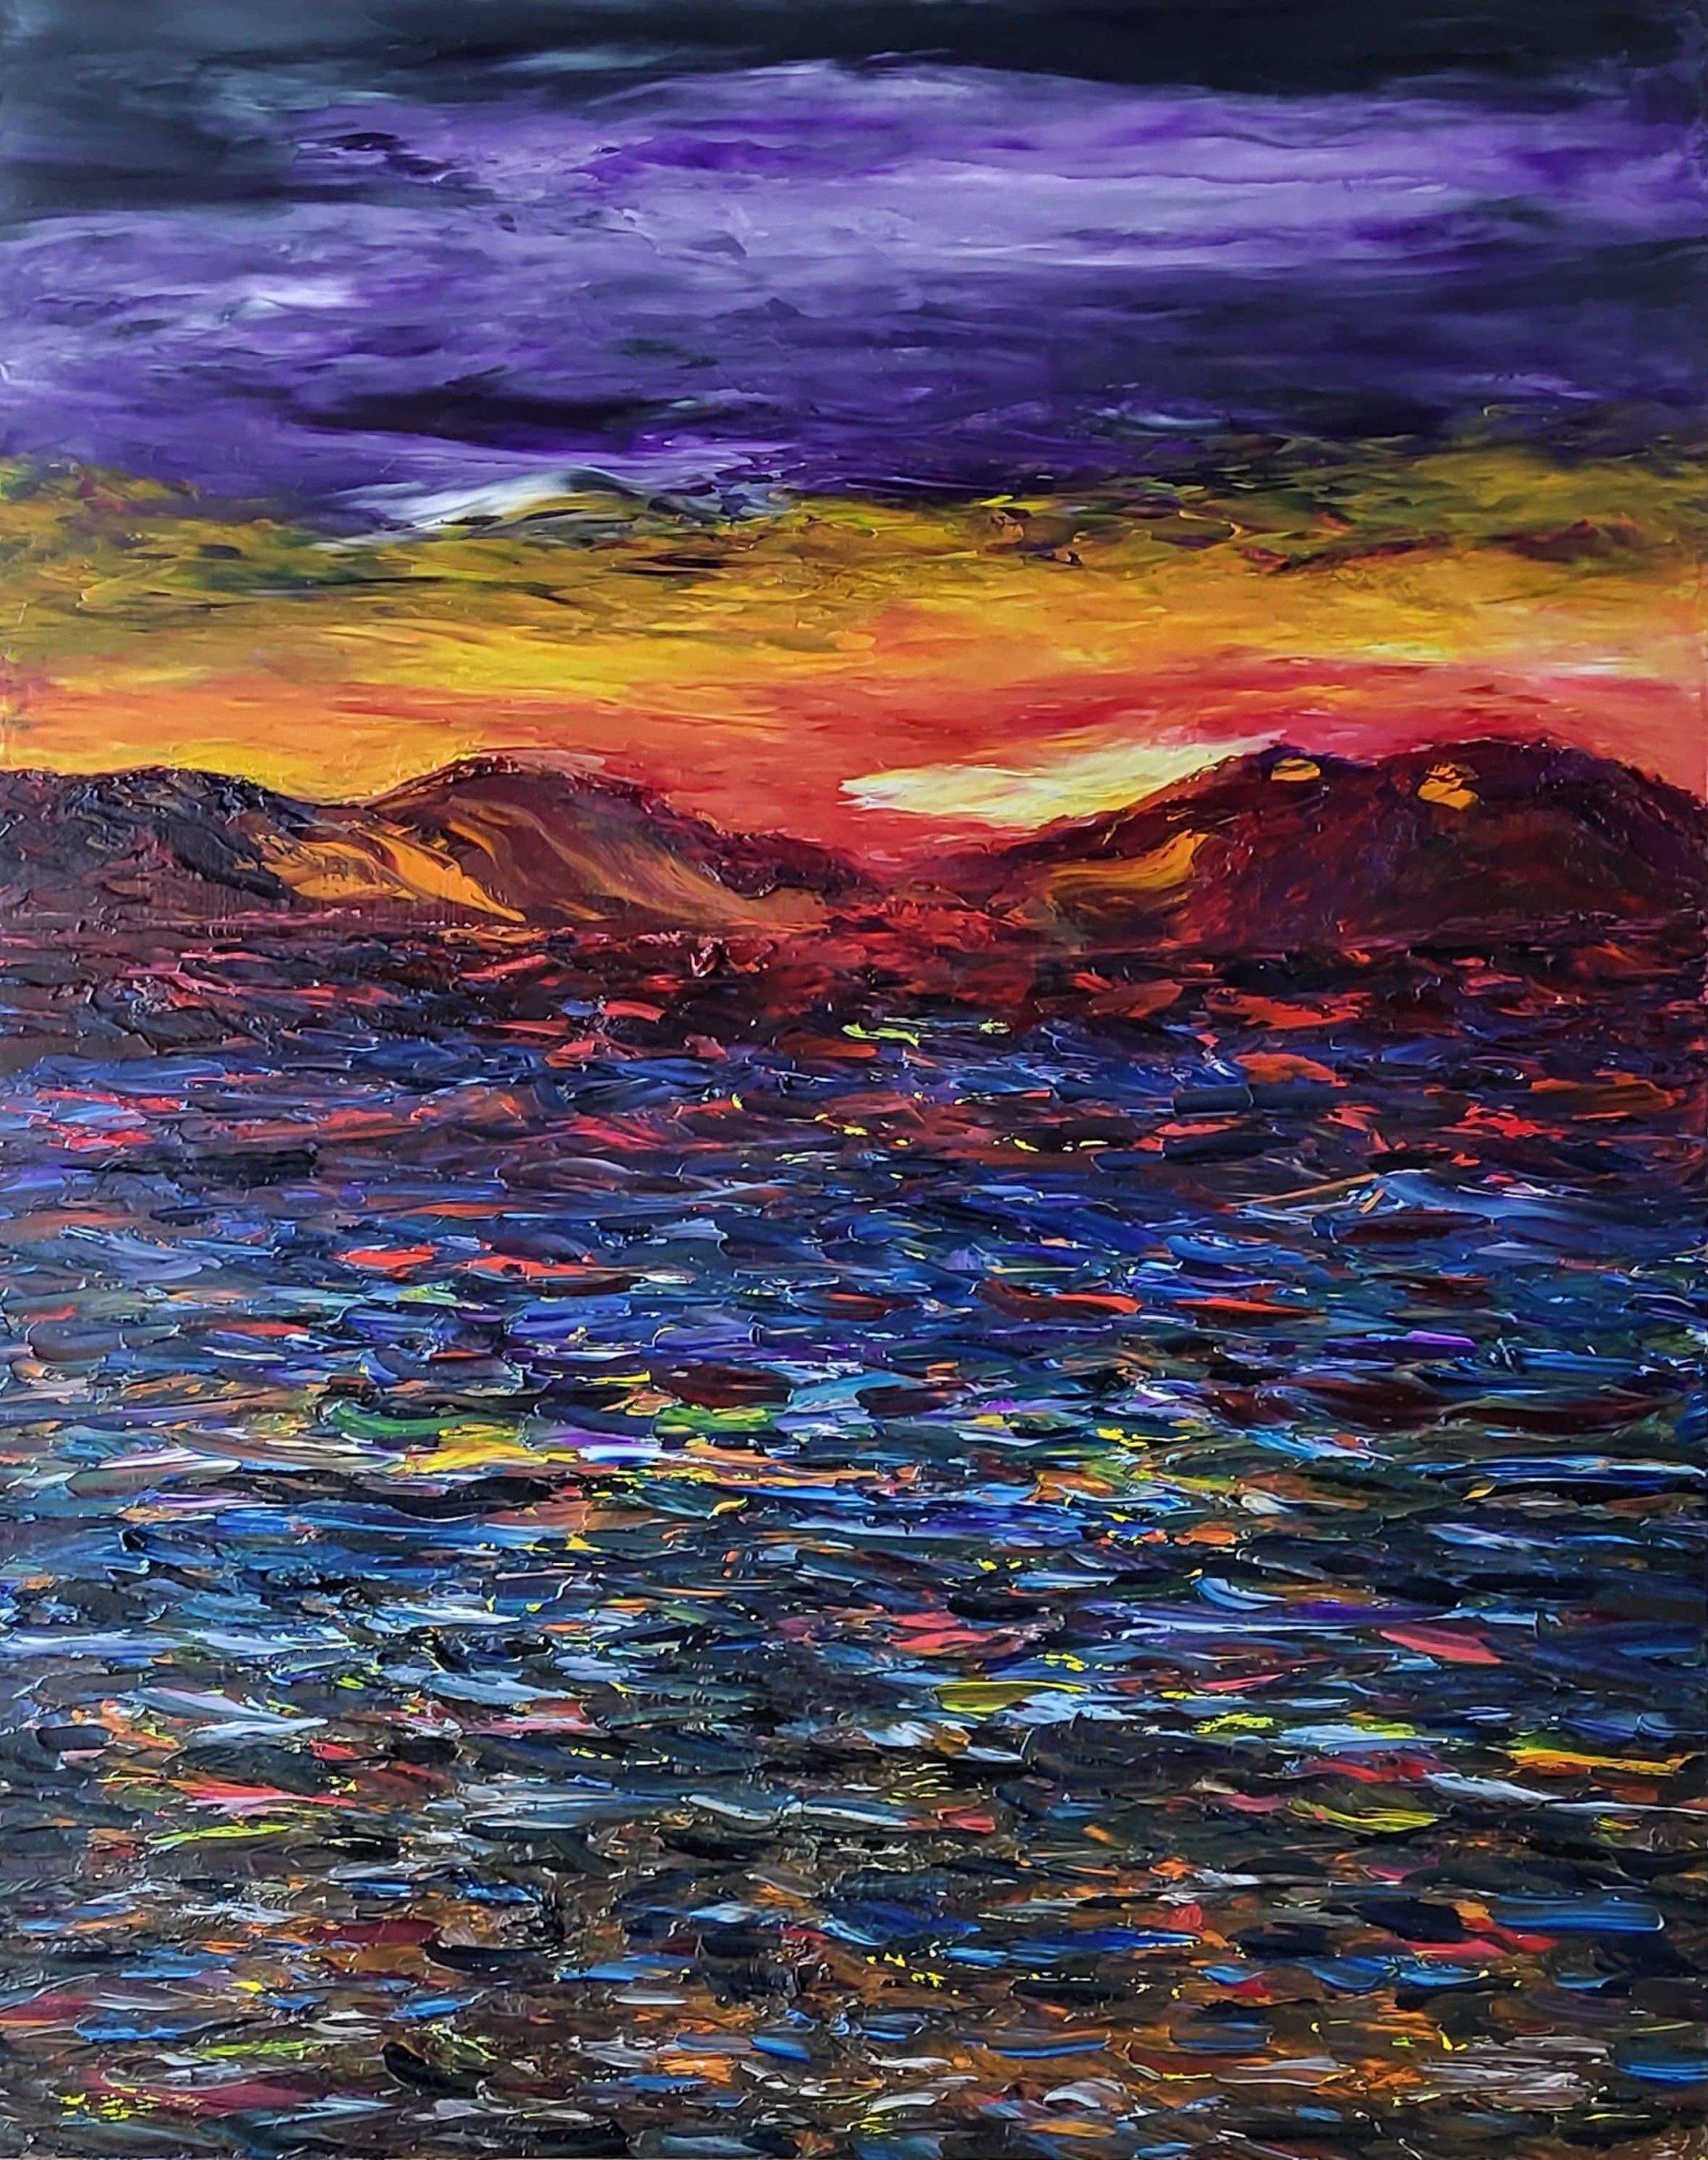 Immanent Storm L'orage est prévisible Oil on Masonite 20 in. x 16 in. Deep purple, Yellow/Orange, Red and blended Prussian- Phthalo Blu e and Manganese create a scene where you know a storm is coming. On the evening before our departure, we were watching the river waves crashing and the deep purple sky announcing the storm was on the way. We left the following morning in the storm. This piece could be categorized as impressionistic.